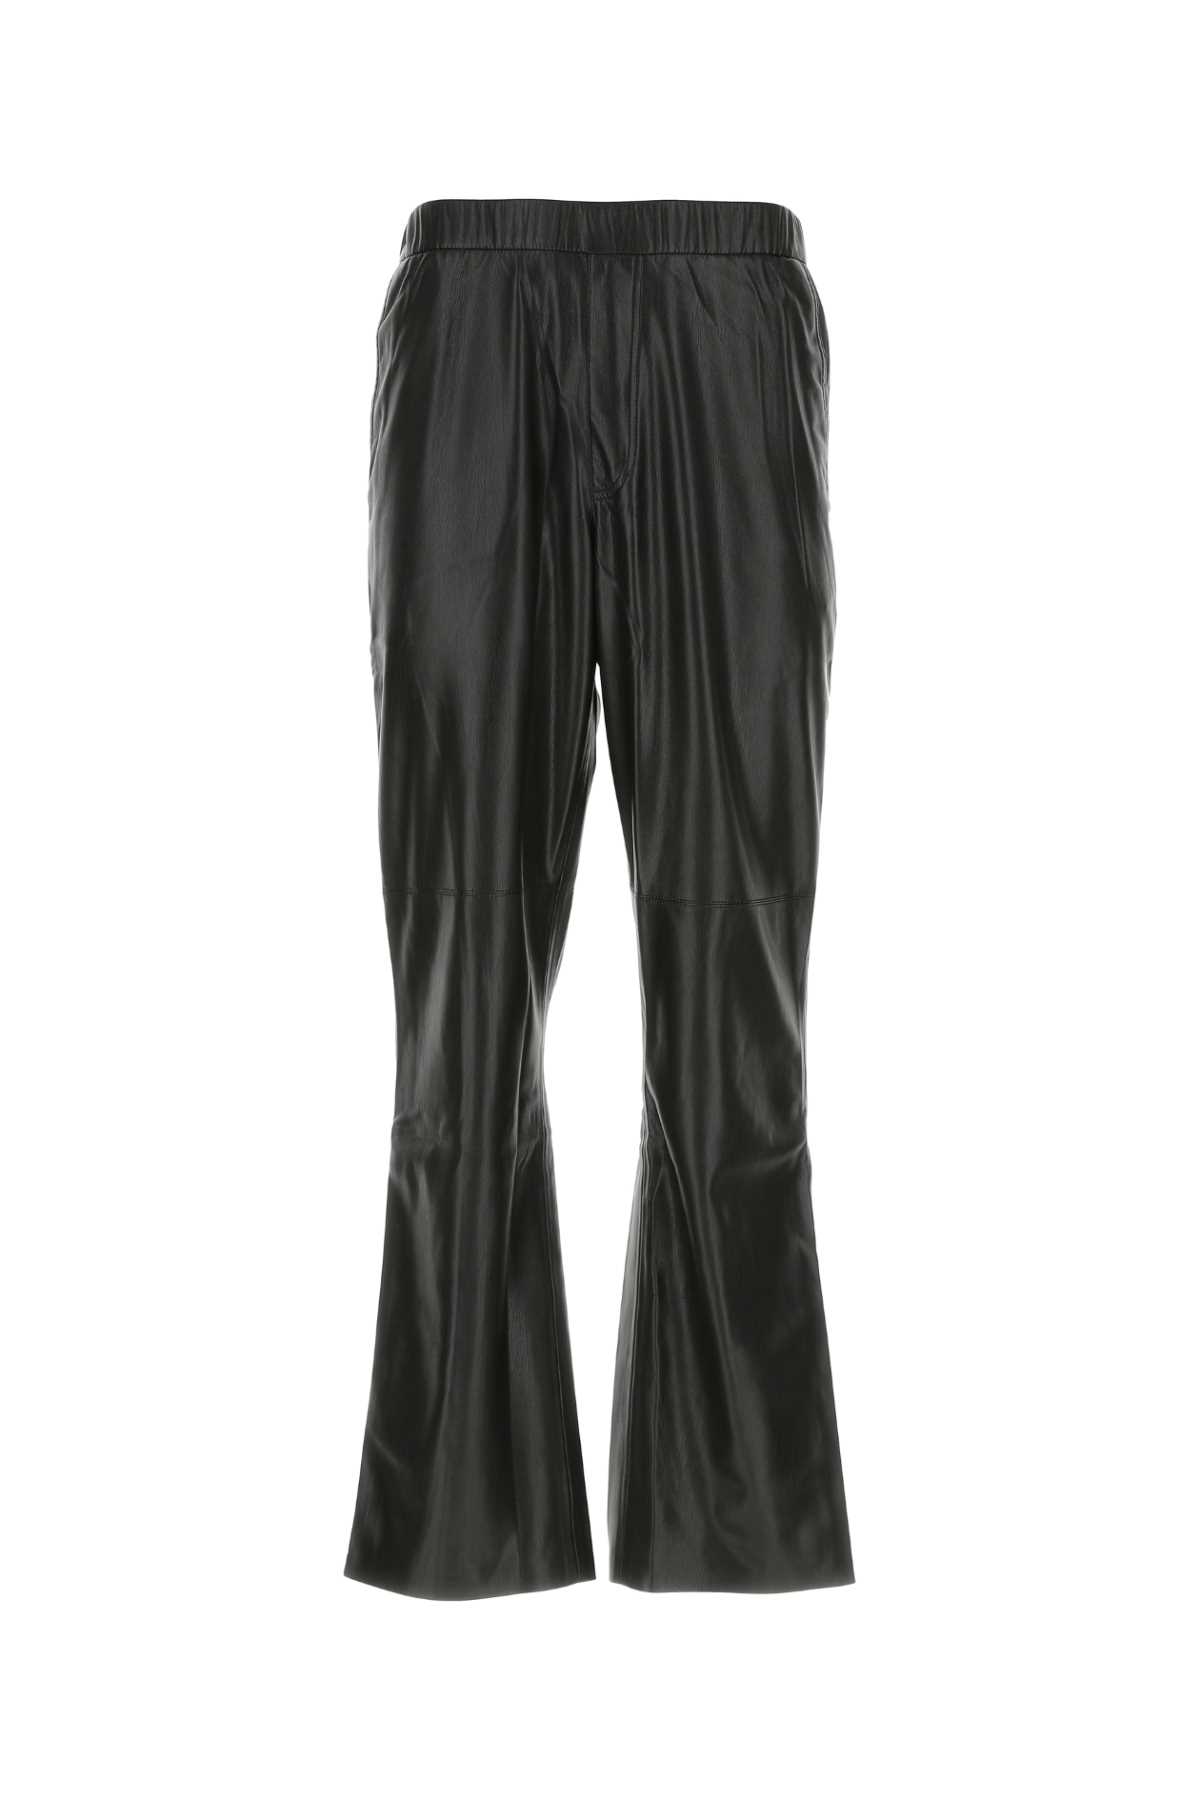 Black Synthetic Leather Maven Pant